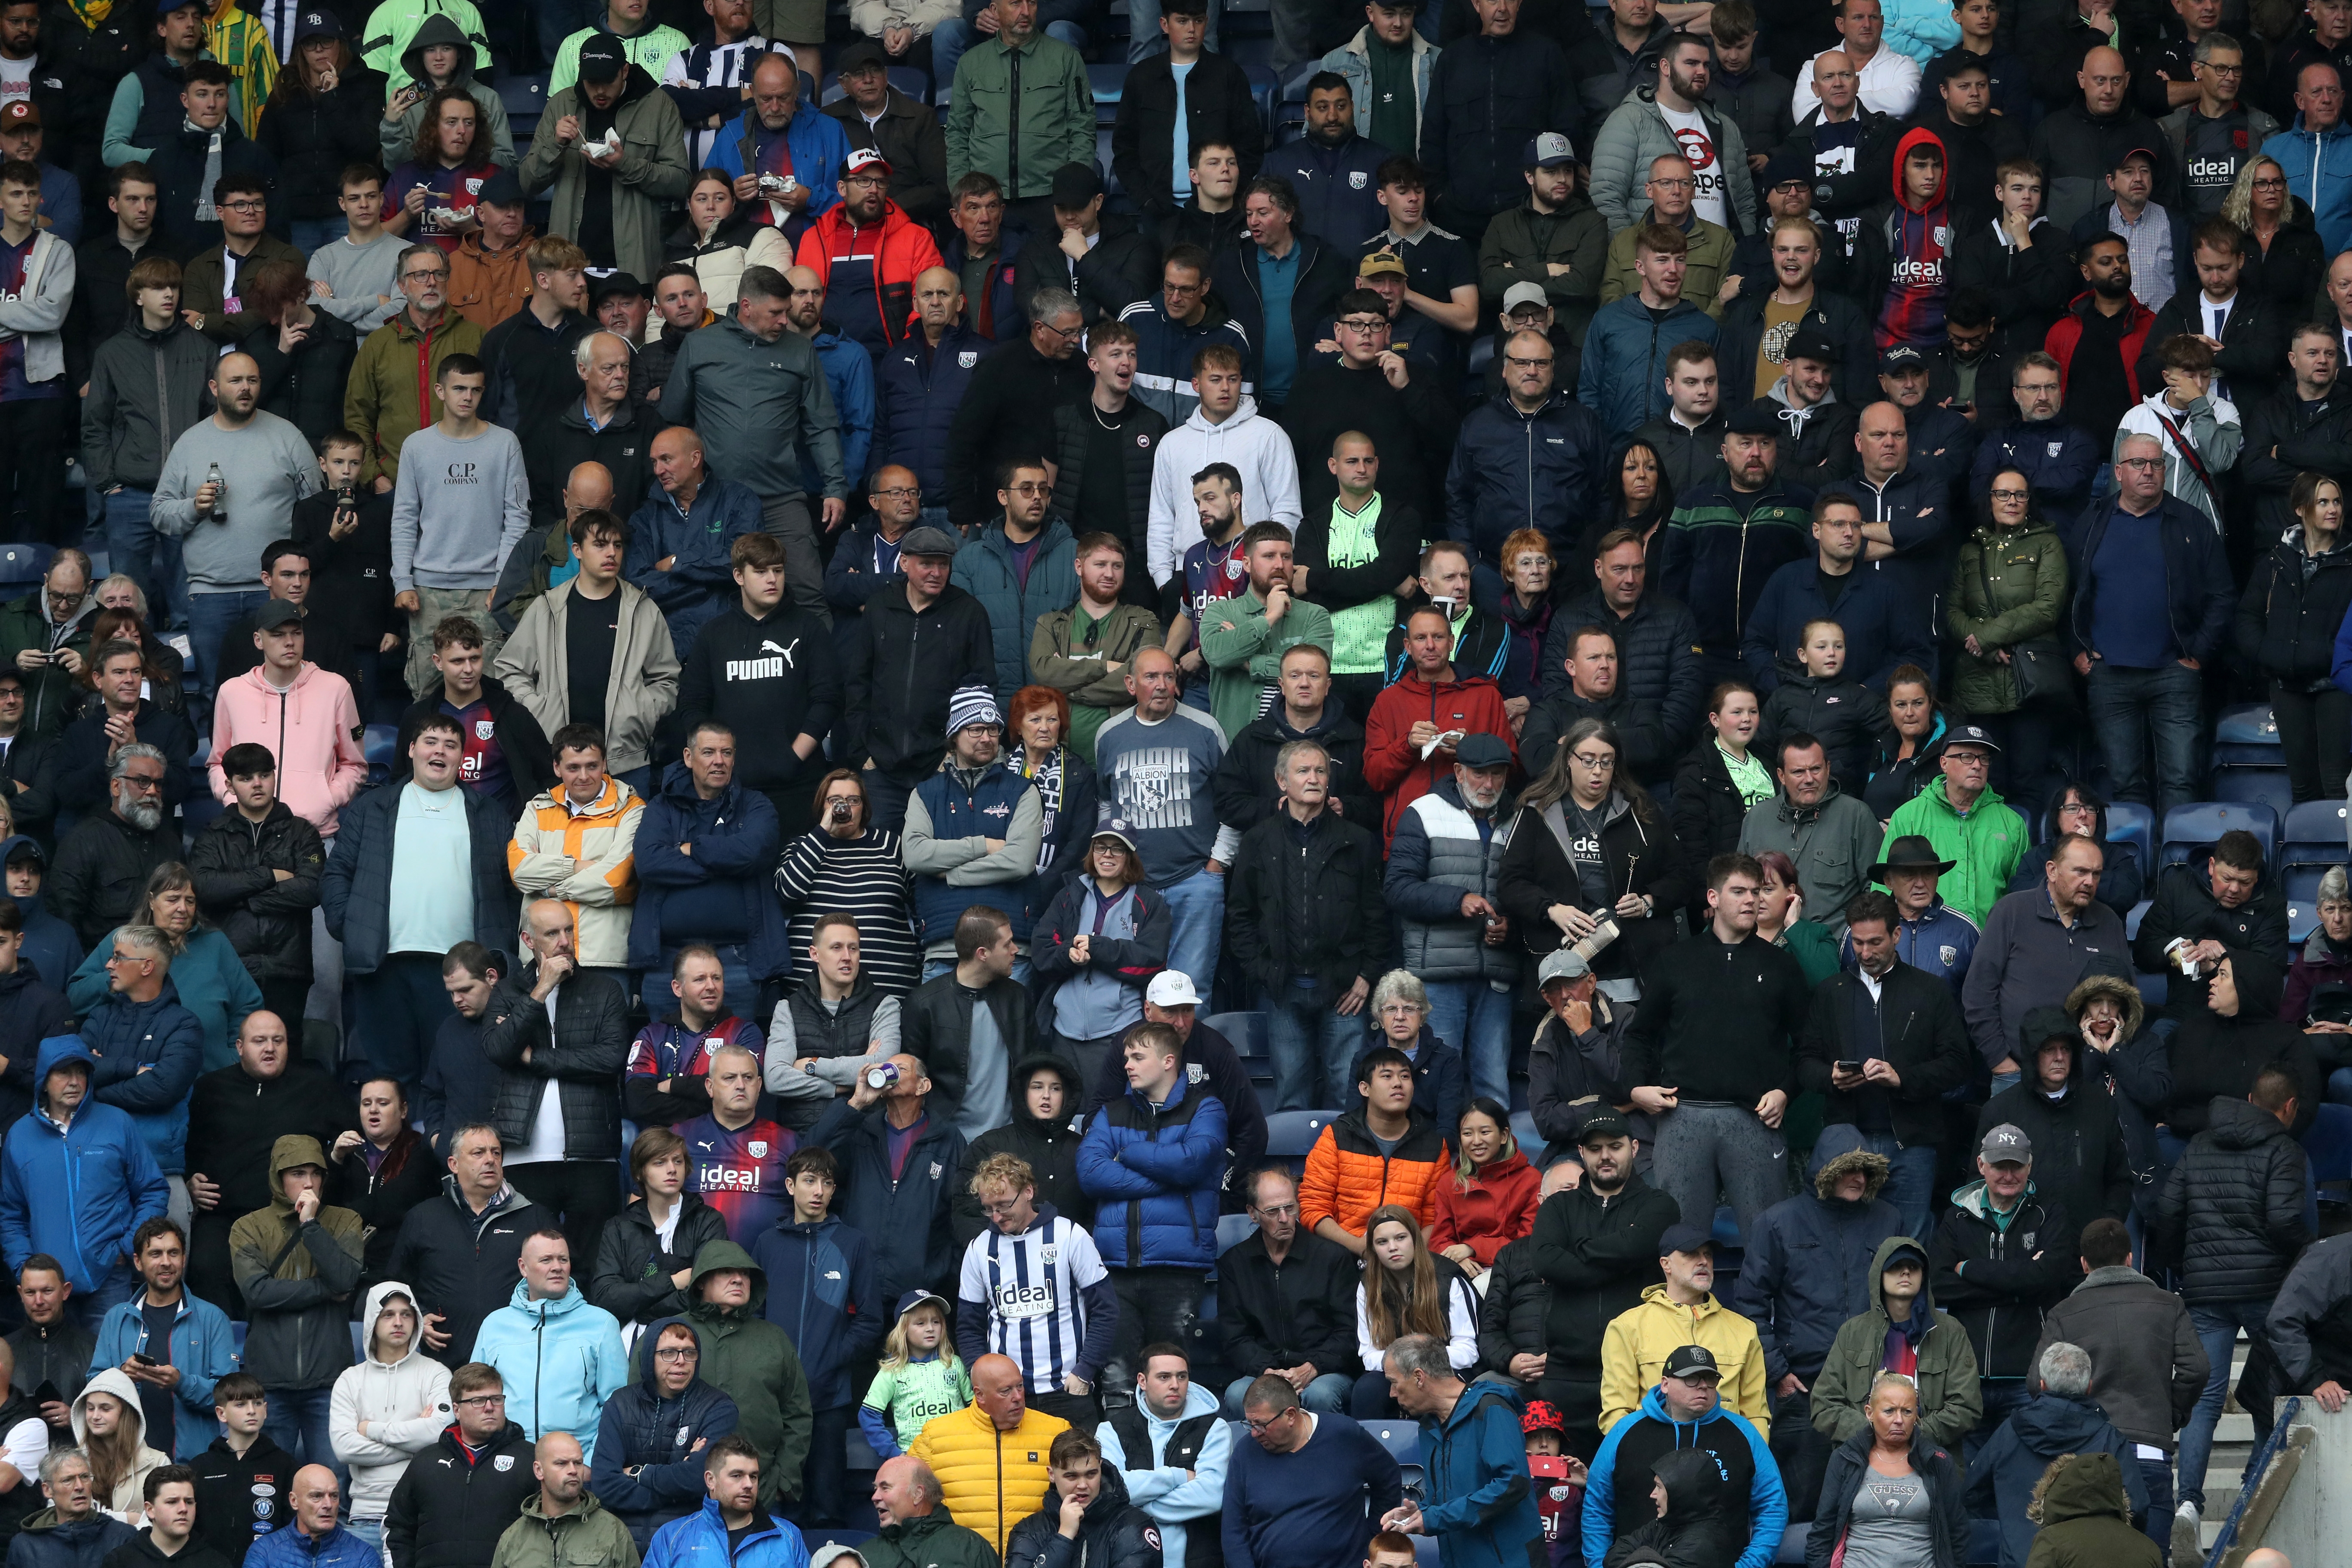 General view of Albion fans at Preston